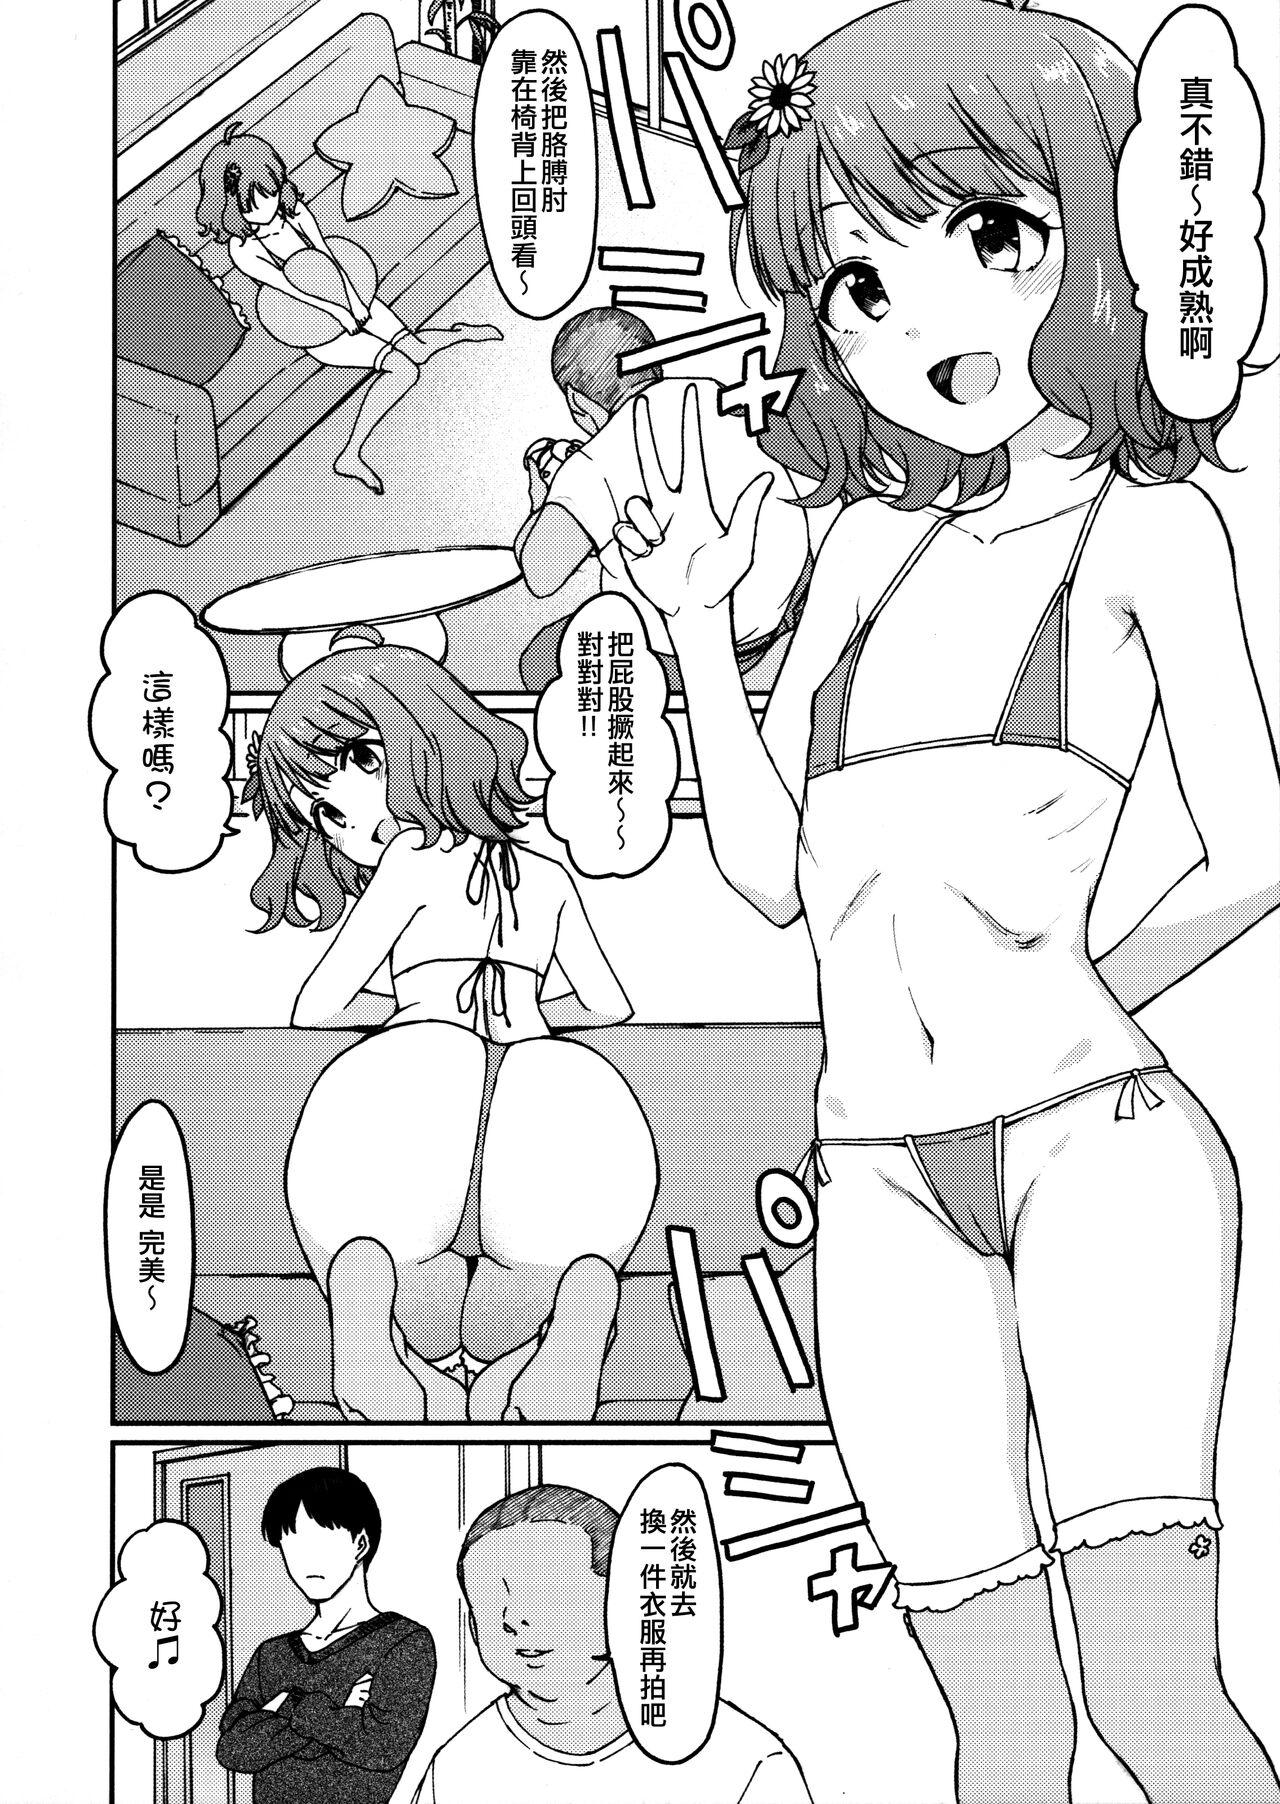 Horny Candy Wrapper - The idolmaster Fuck - Page 5